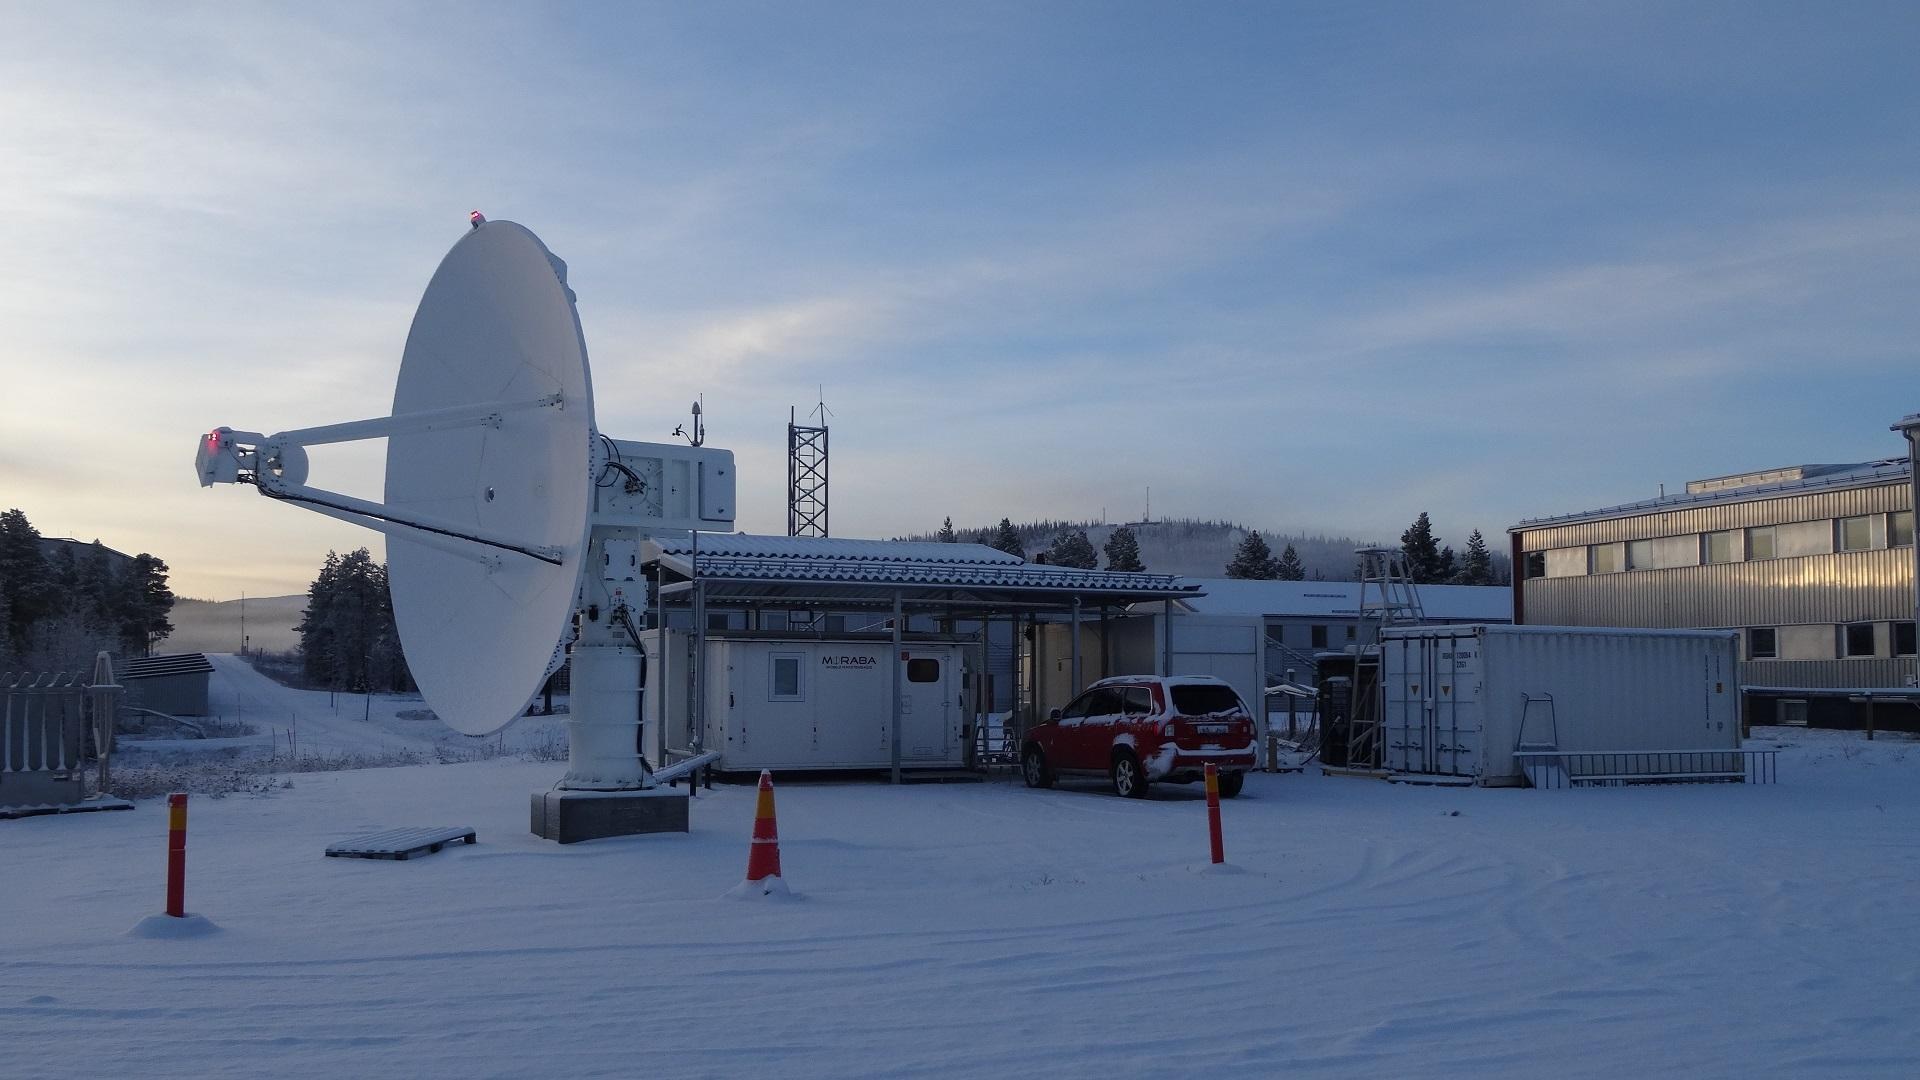 Mobile telemetry station in use at the Esrange Space Center, with the main antenna on a base and the control station covered with a protective roof